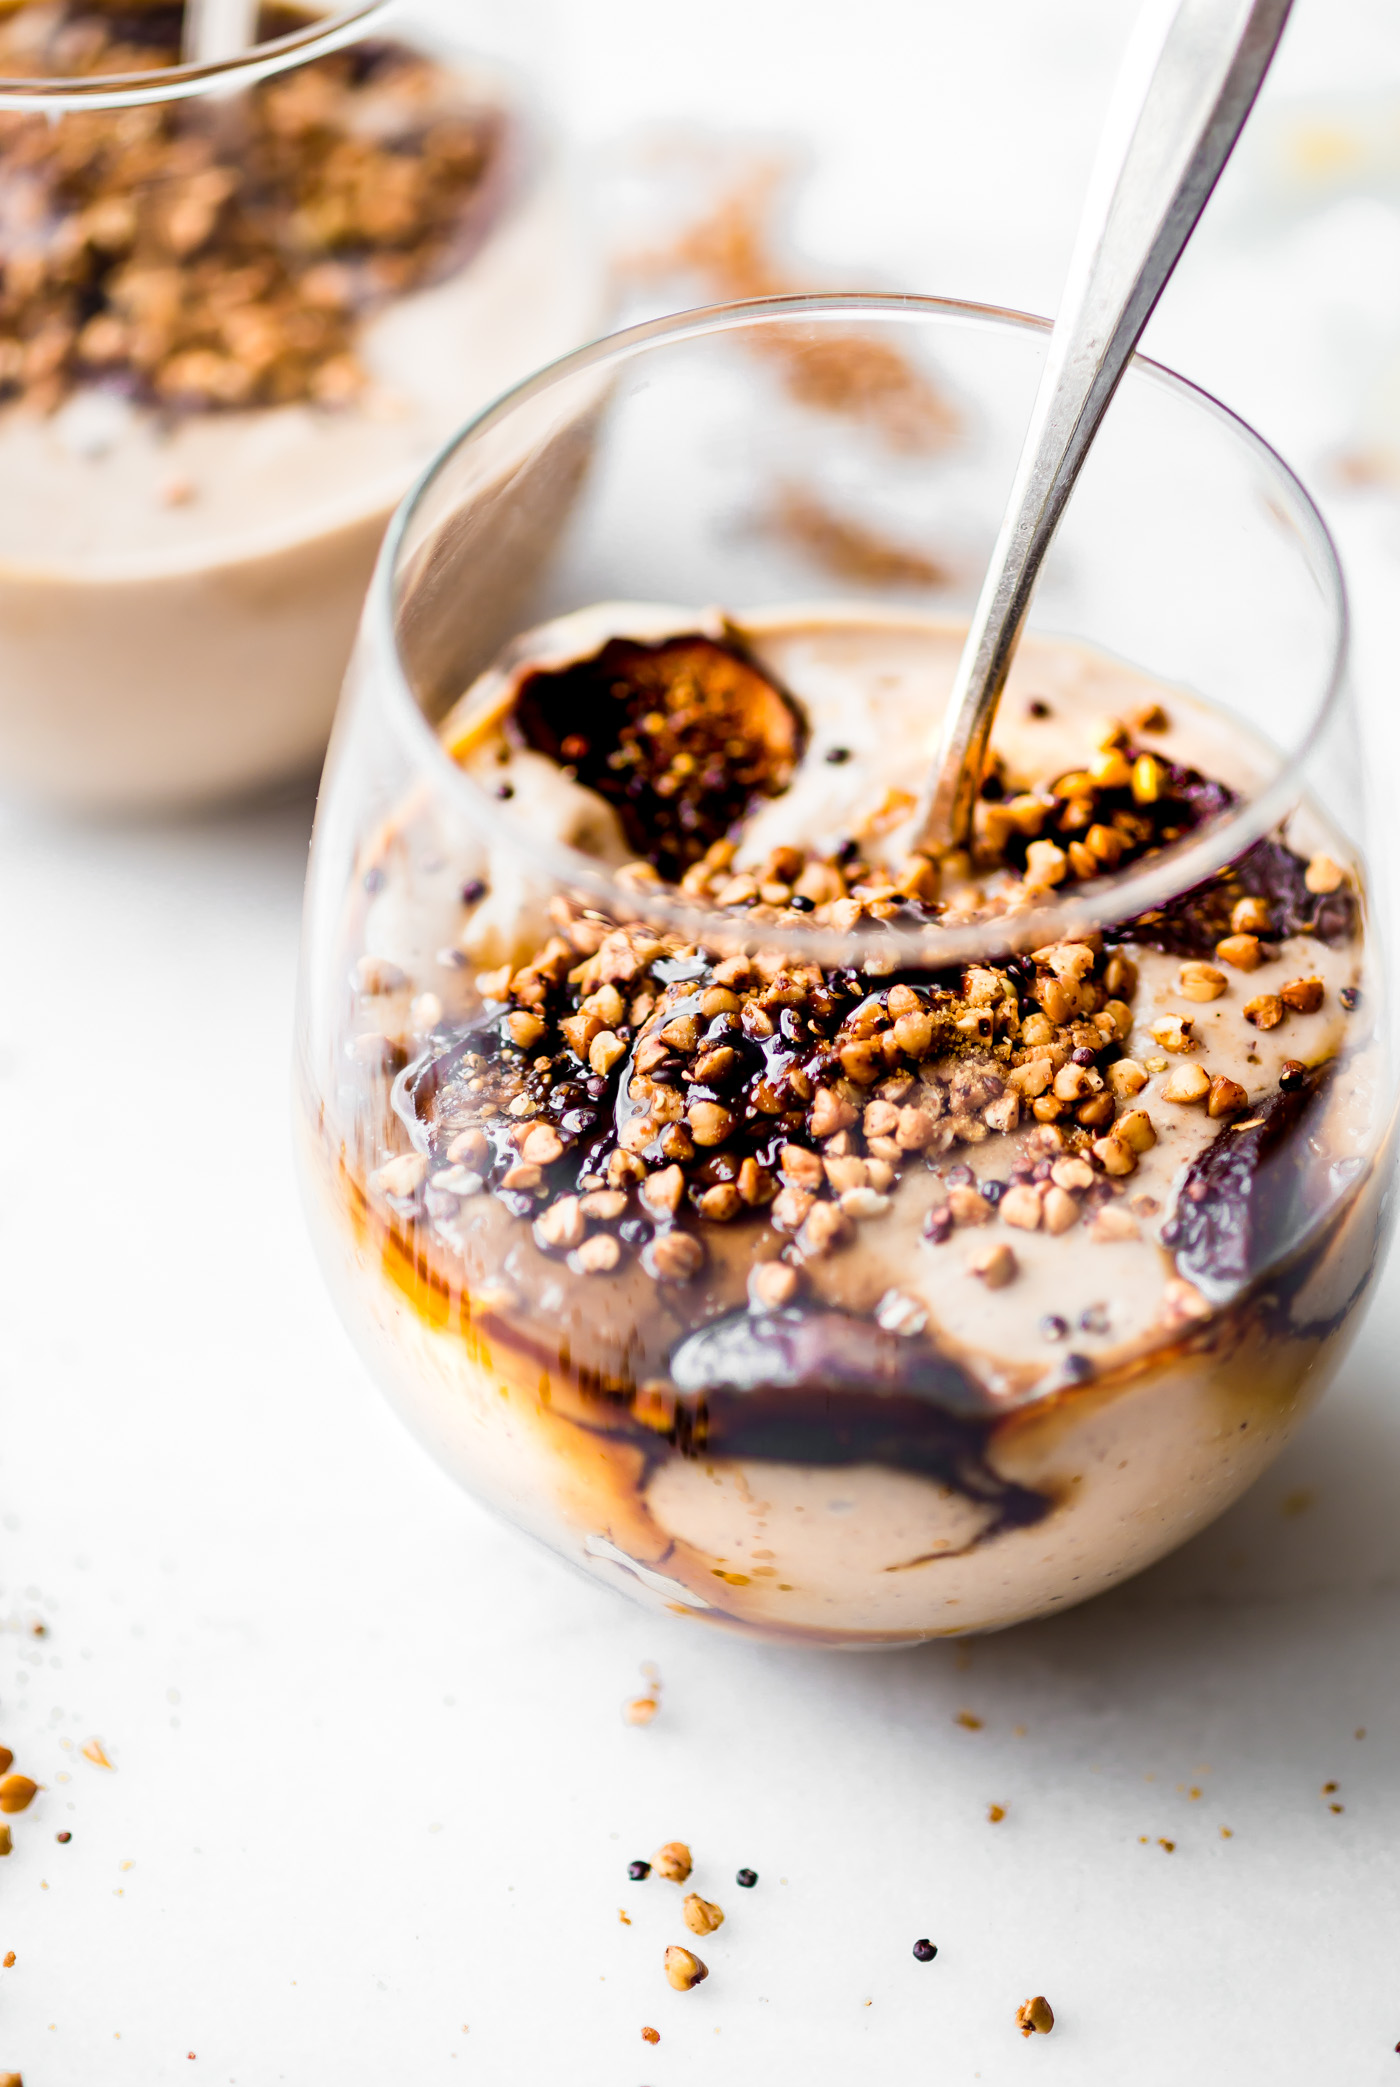 Creamy Fig Yogurt Breakfast Parfait Cups! A healthy gluten-free breakfast with a fiber boost! A Blended Yogurt Cup with dried Figs, chia seed, a drizzle of molasses, and a cinnamon toasted Buckwheat topping! Ya'll, this is so heavenly! Simple ingredients, energizing, quick to make, and oh so good! 